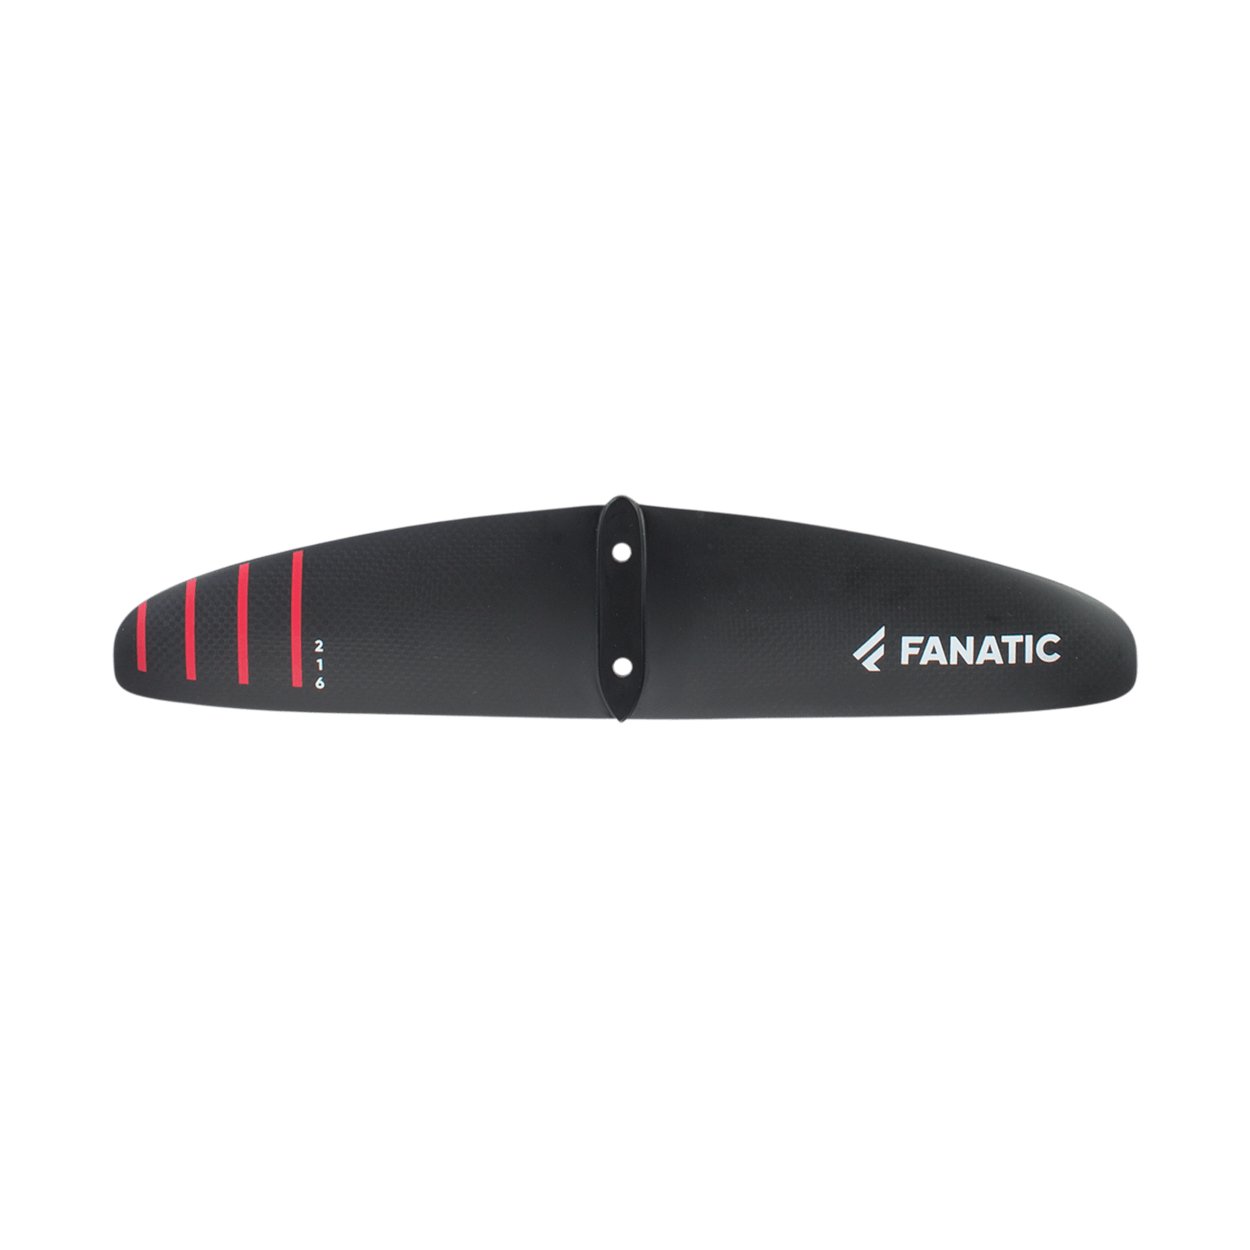 Fanatic Back Wing 2022 - Worthing Watersports - 9010583124247 - Foilparts - Fanatic X